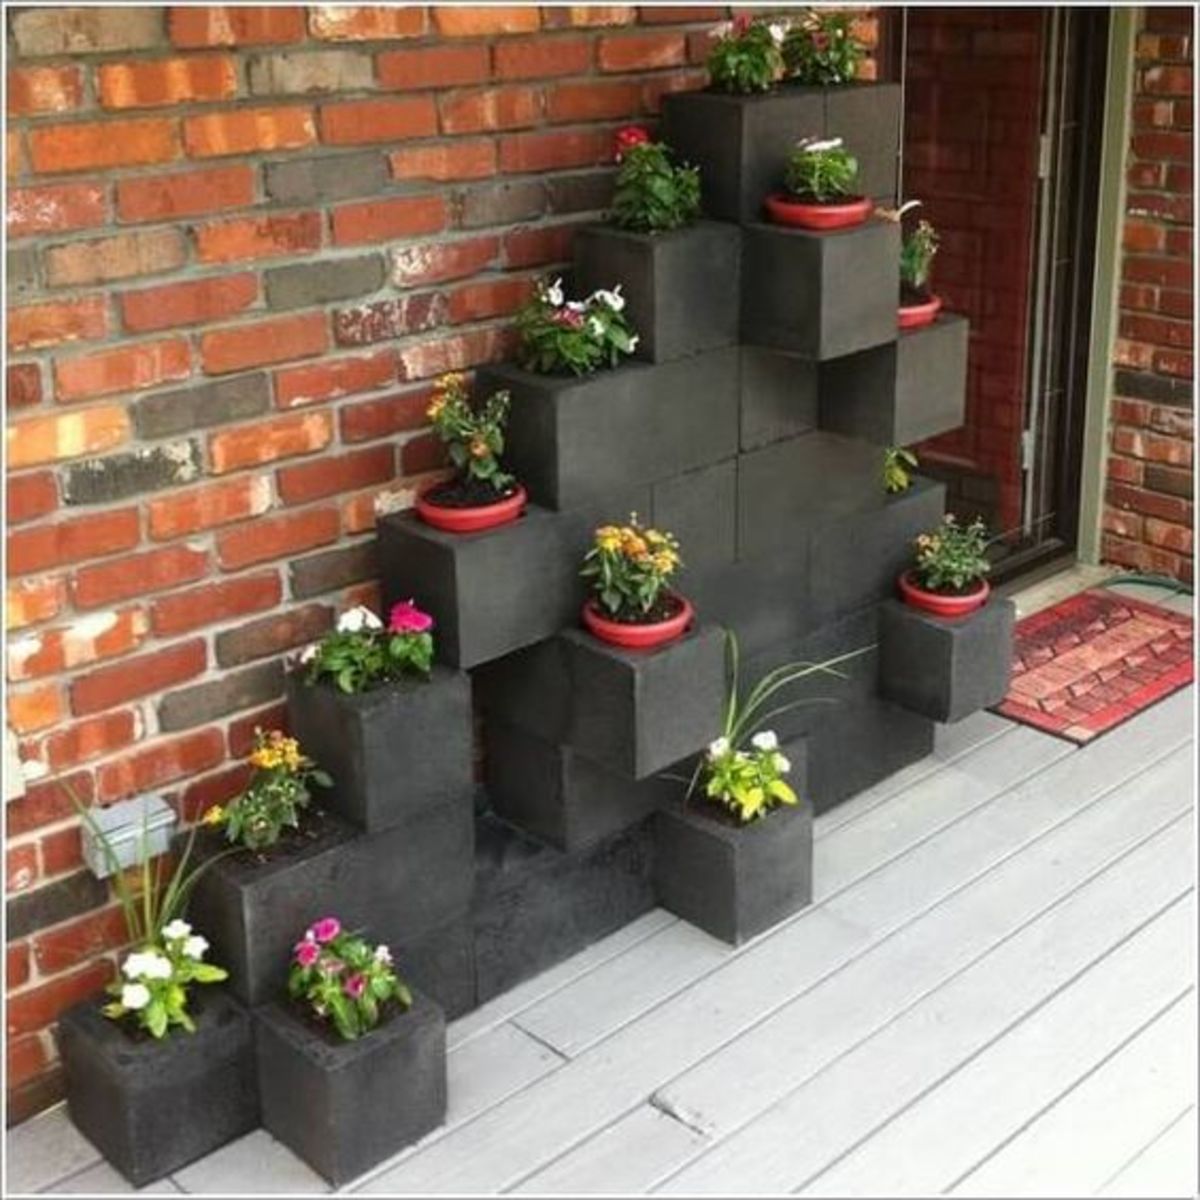 The charming cinder blocks garden offers a stimulating aspect to your front yard.